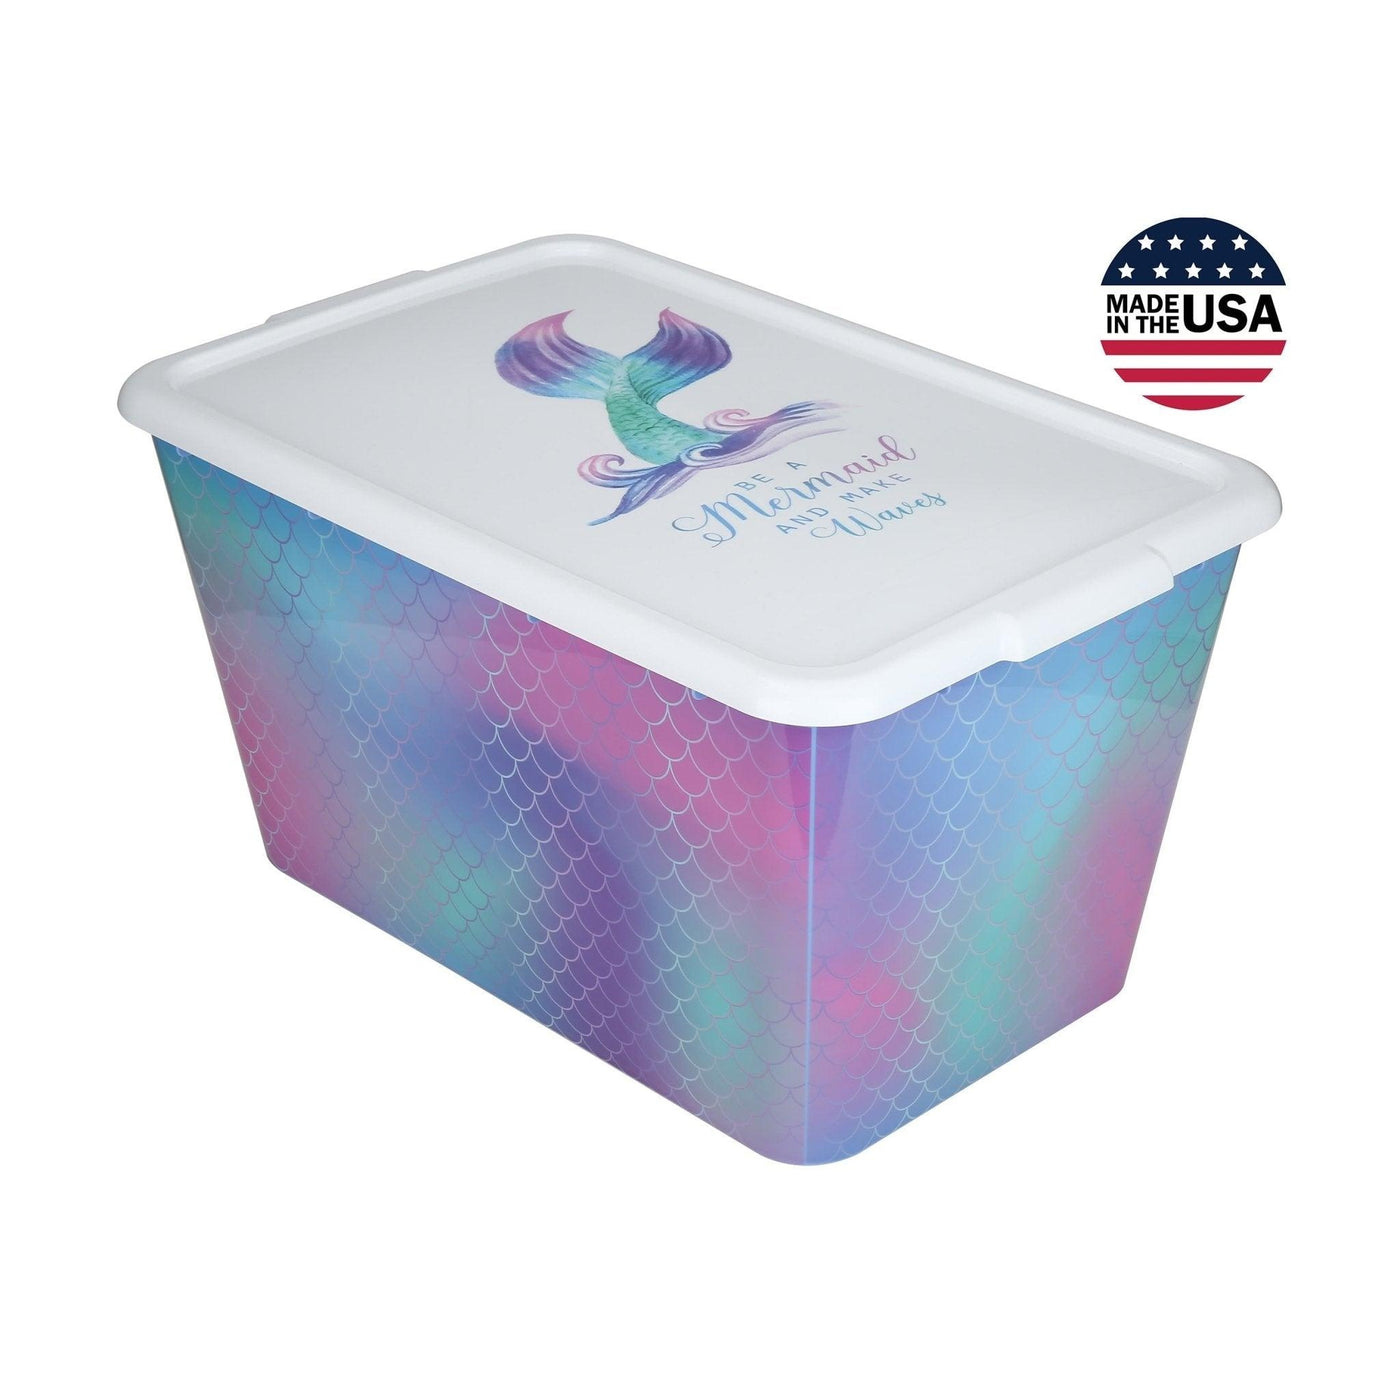 SimplyKleen 14.5-gal. Reusable Opaque Rainbow Mermaid/Unicorn Stacking Storage Containers with Printed Lids (Pack of 4)